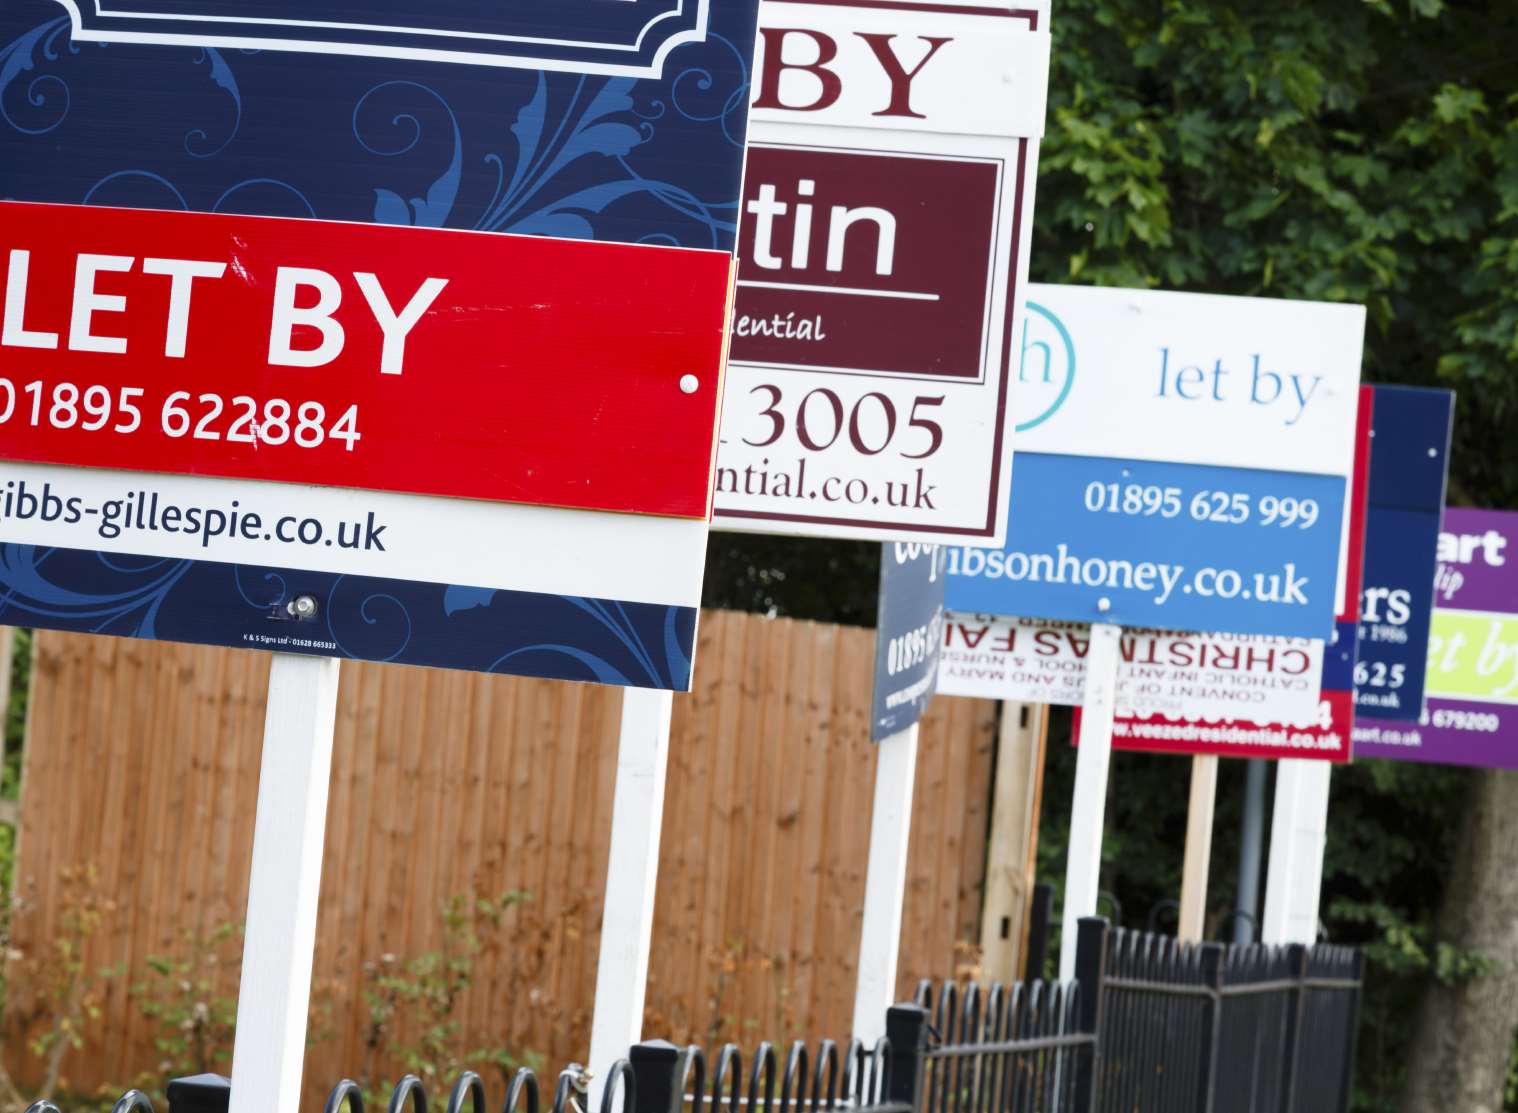 Estate agents could face a £5,000 fine for failing to declare fees